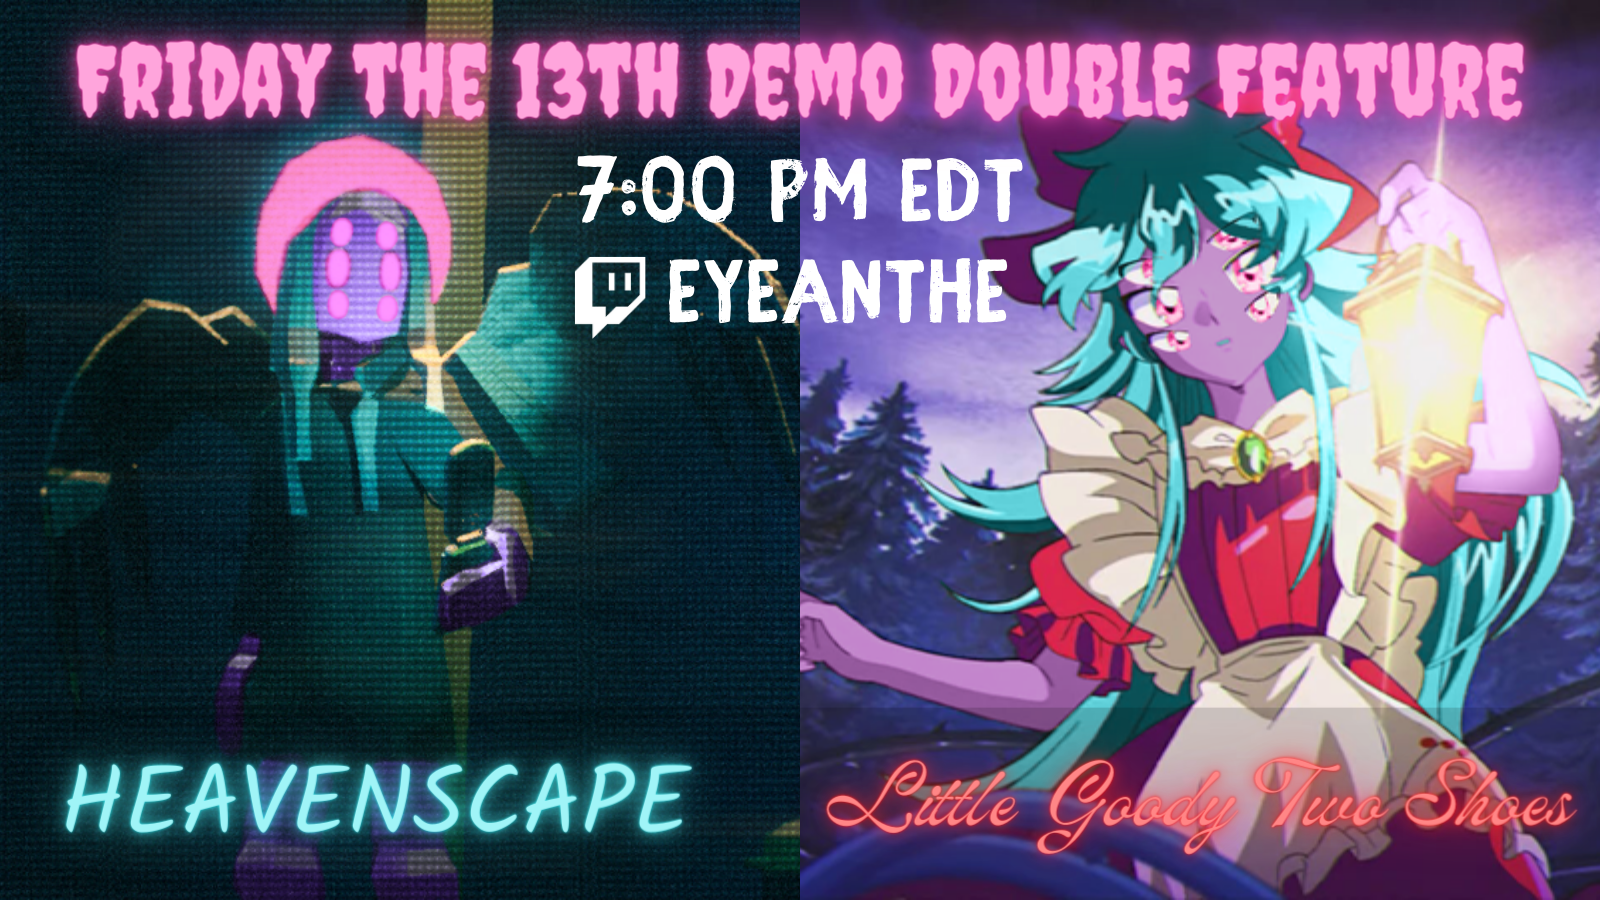 Promotional image for a Friday the 13th demo double feature
                                                stream featuring HEAVENSCAPE and Little Goody Two Shoes. ANGEL and
                                                Elise are both edited to look like Ianthe.